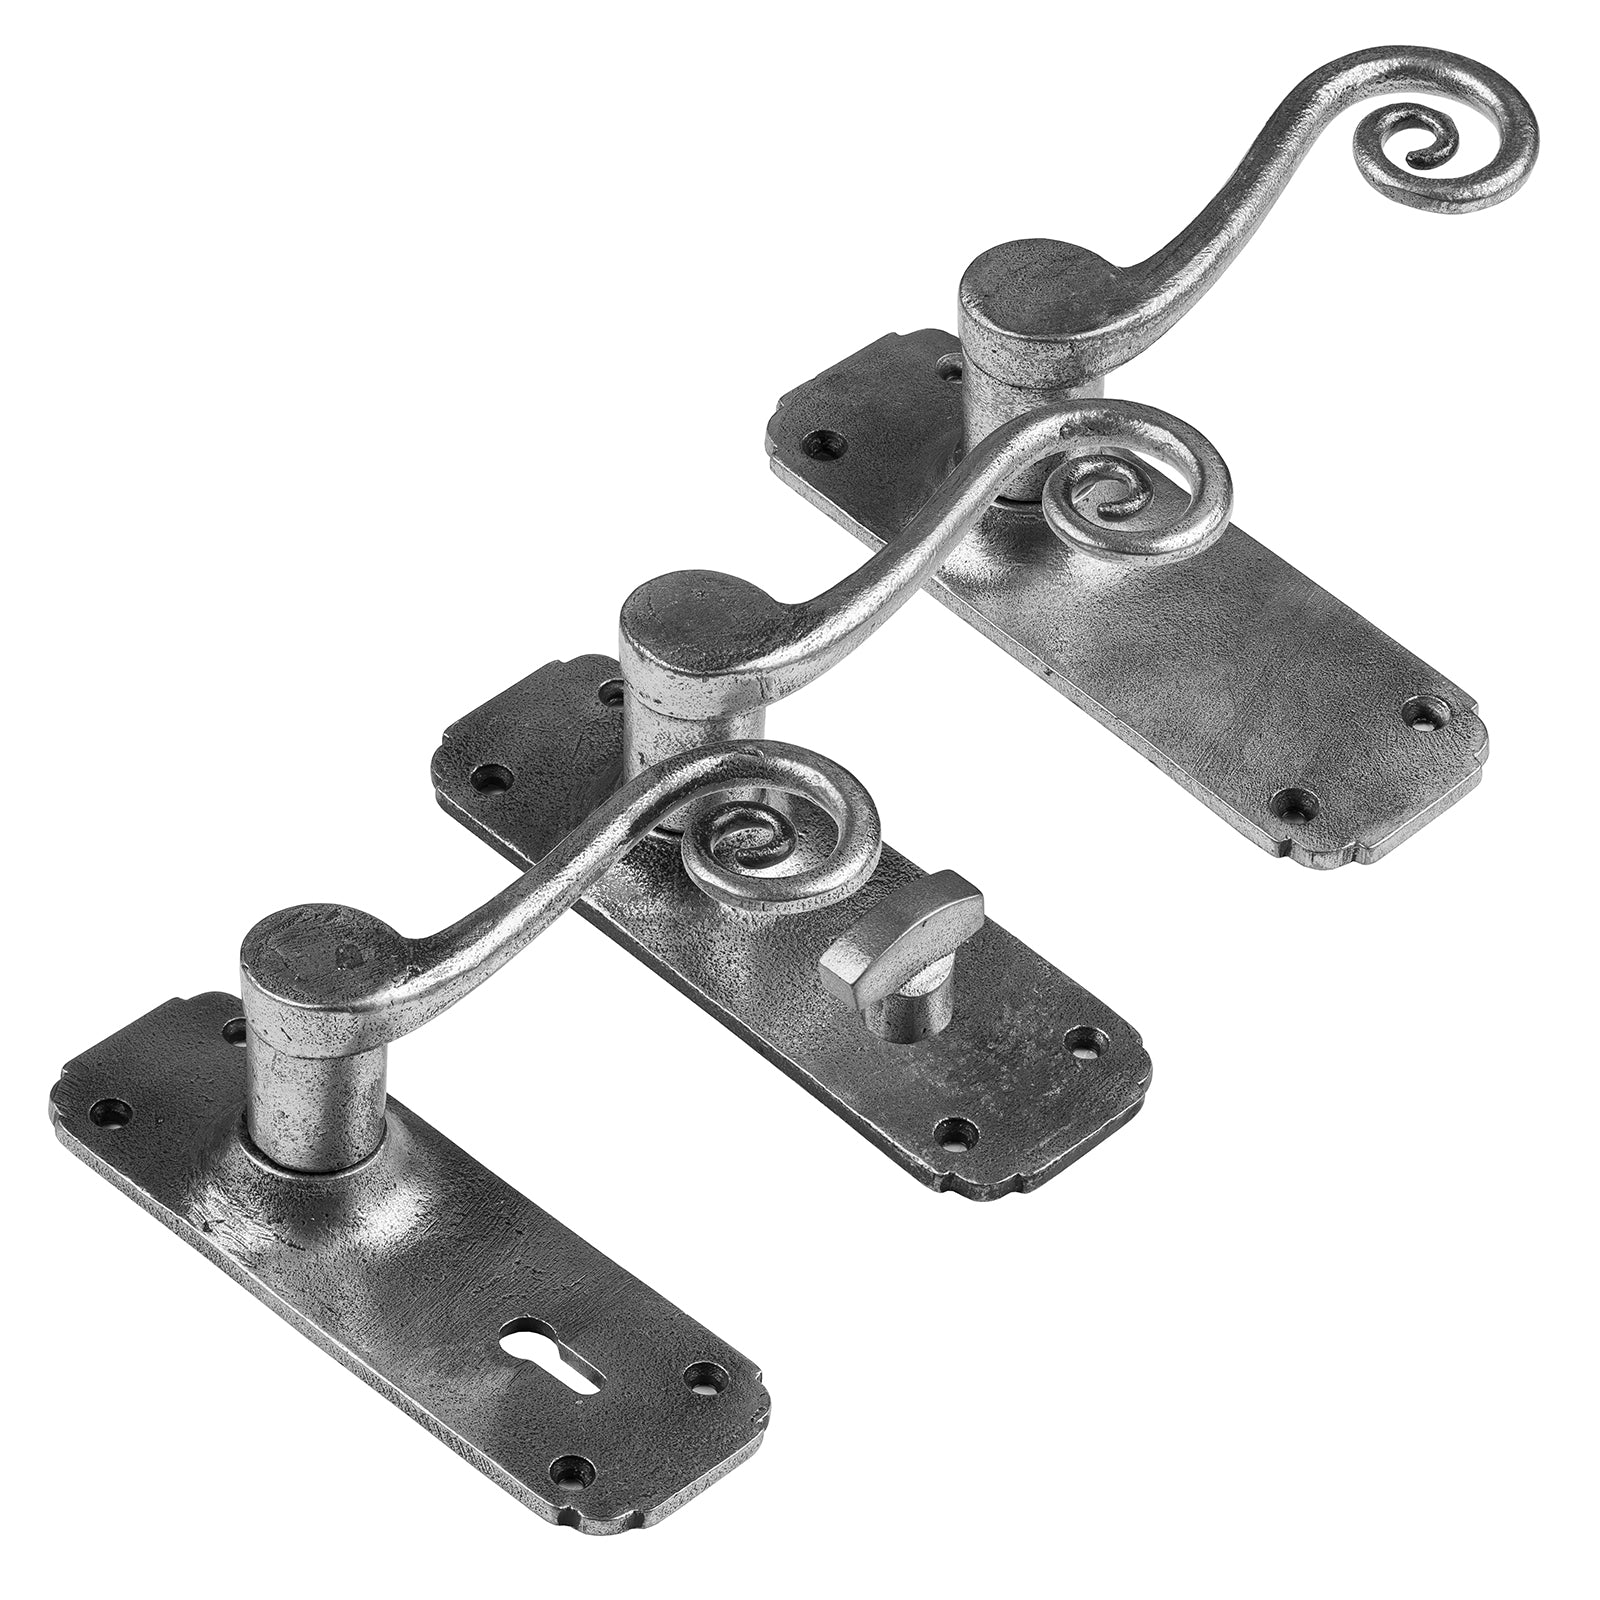 Monkey Tail Lever Handles in a pewter finish, pewter door knobs